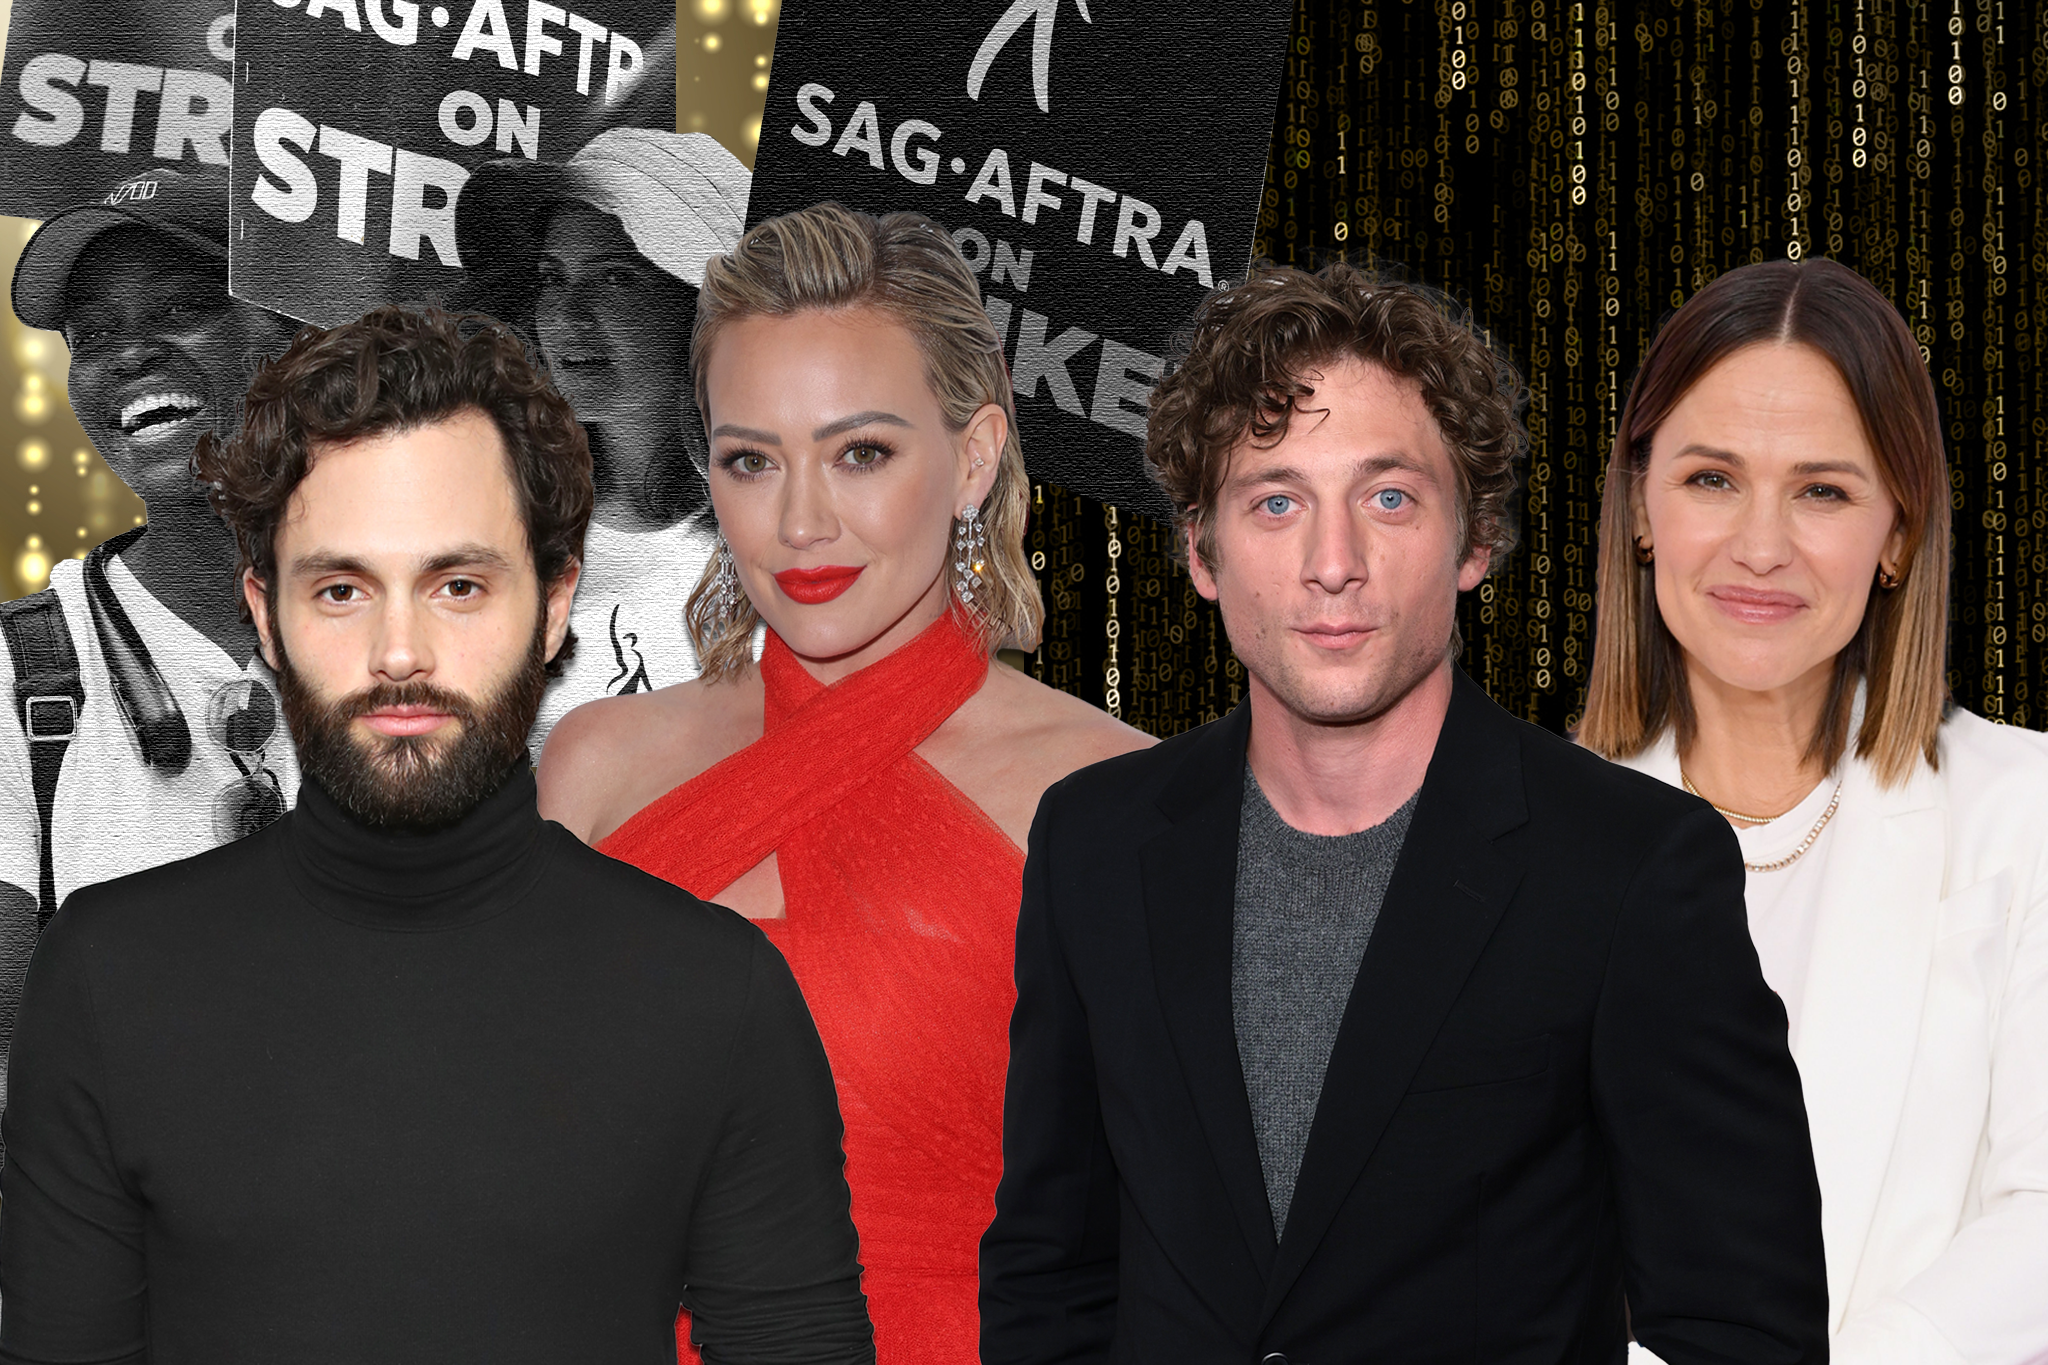 From L-R: Penn Badgley, Hilary Duff, Jeremy Allen White and Jennifer Garner have all been on the picket lines during the SAG-Aftra strike